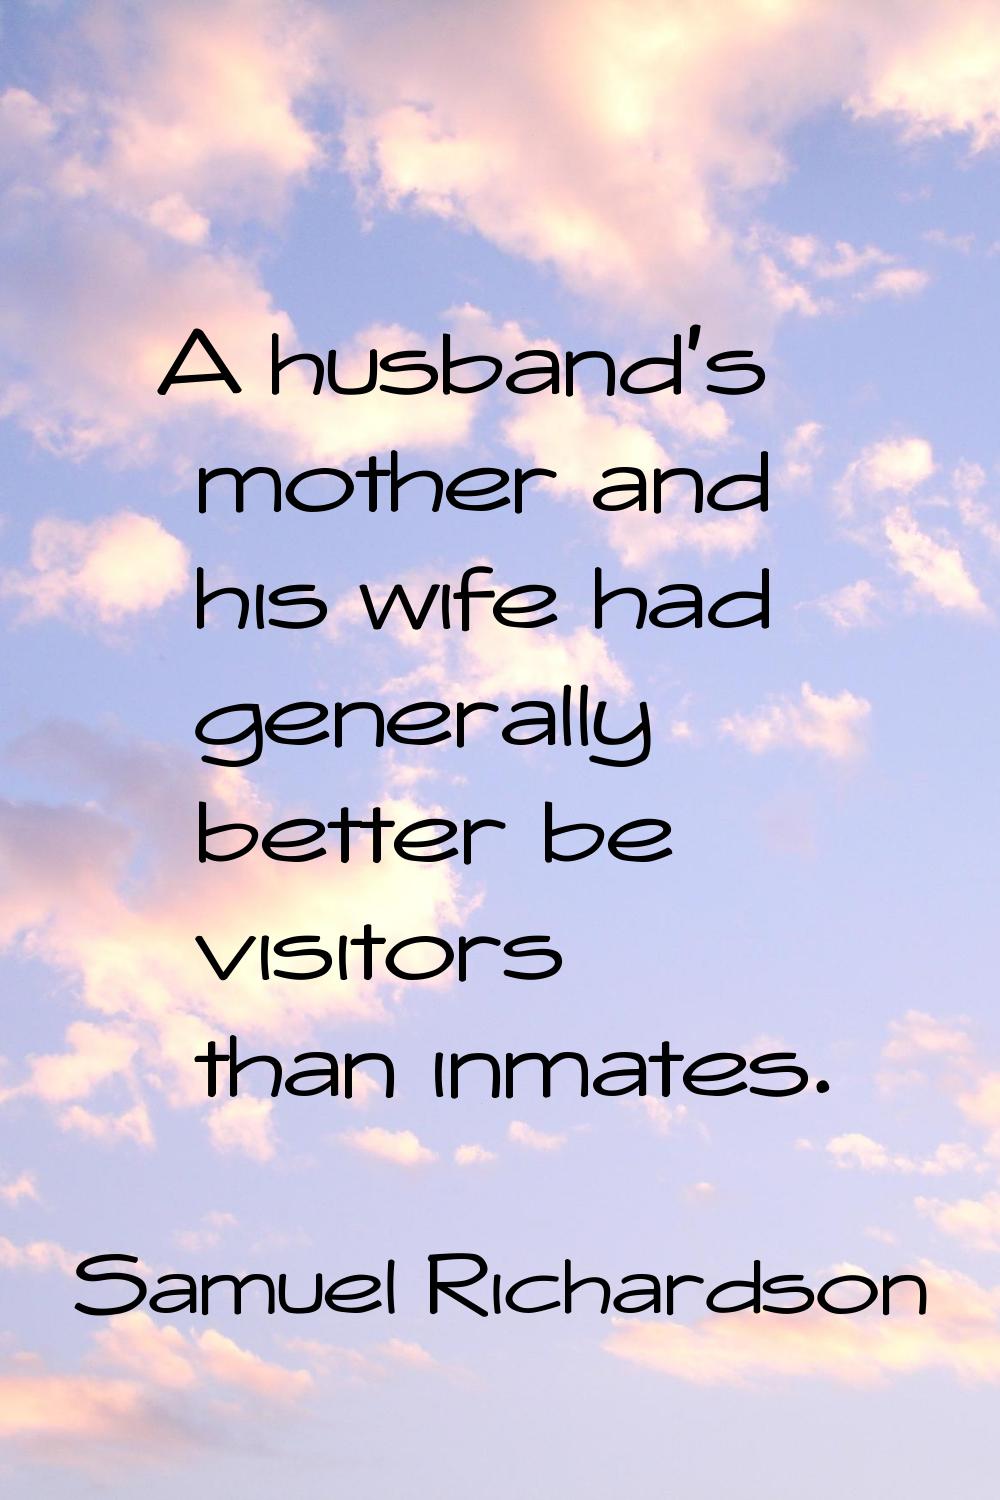 A husband's mother and his wife had generally better be visitors than inmates.